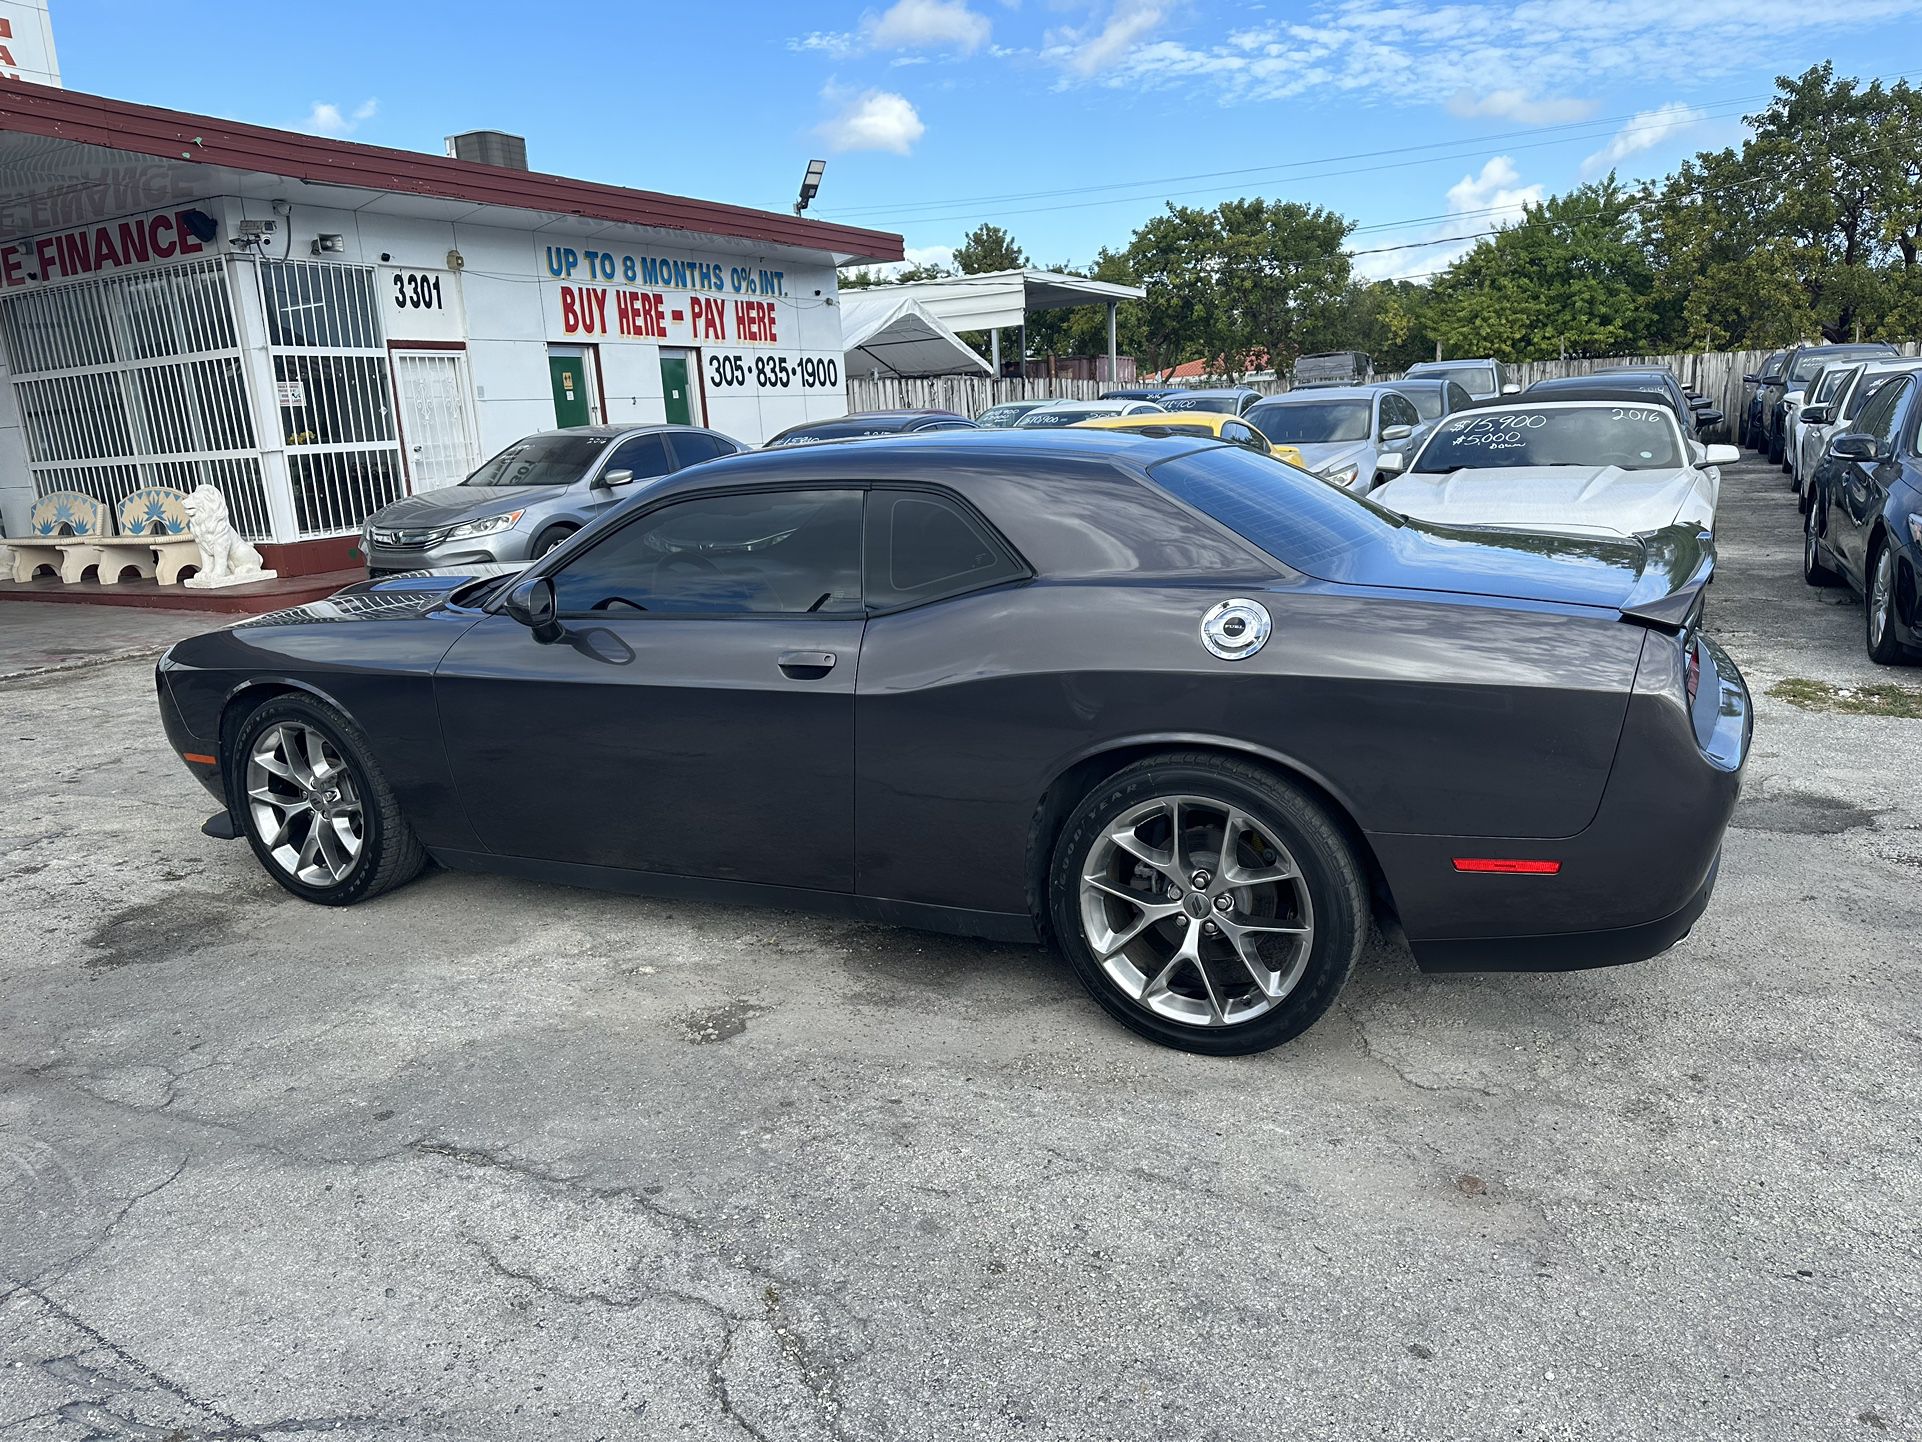 used 2020 dodge challenger - back view